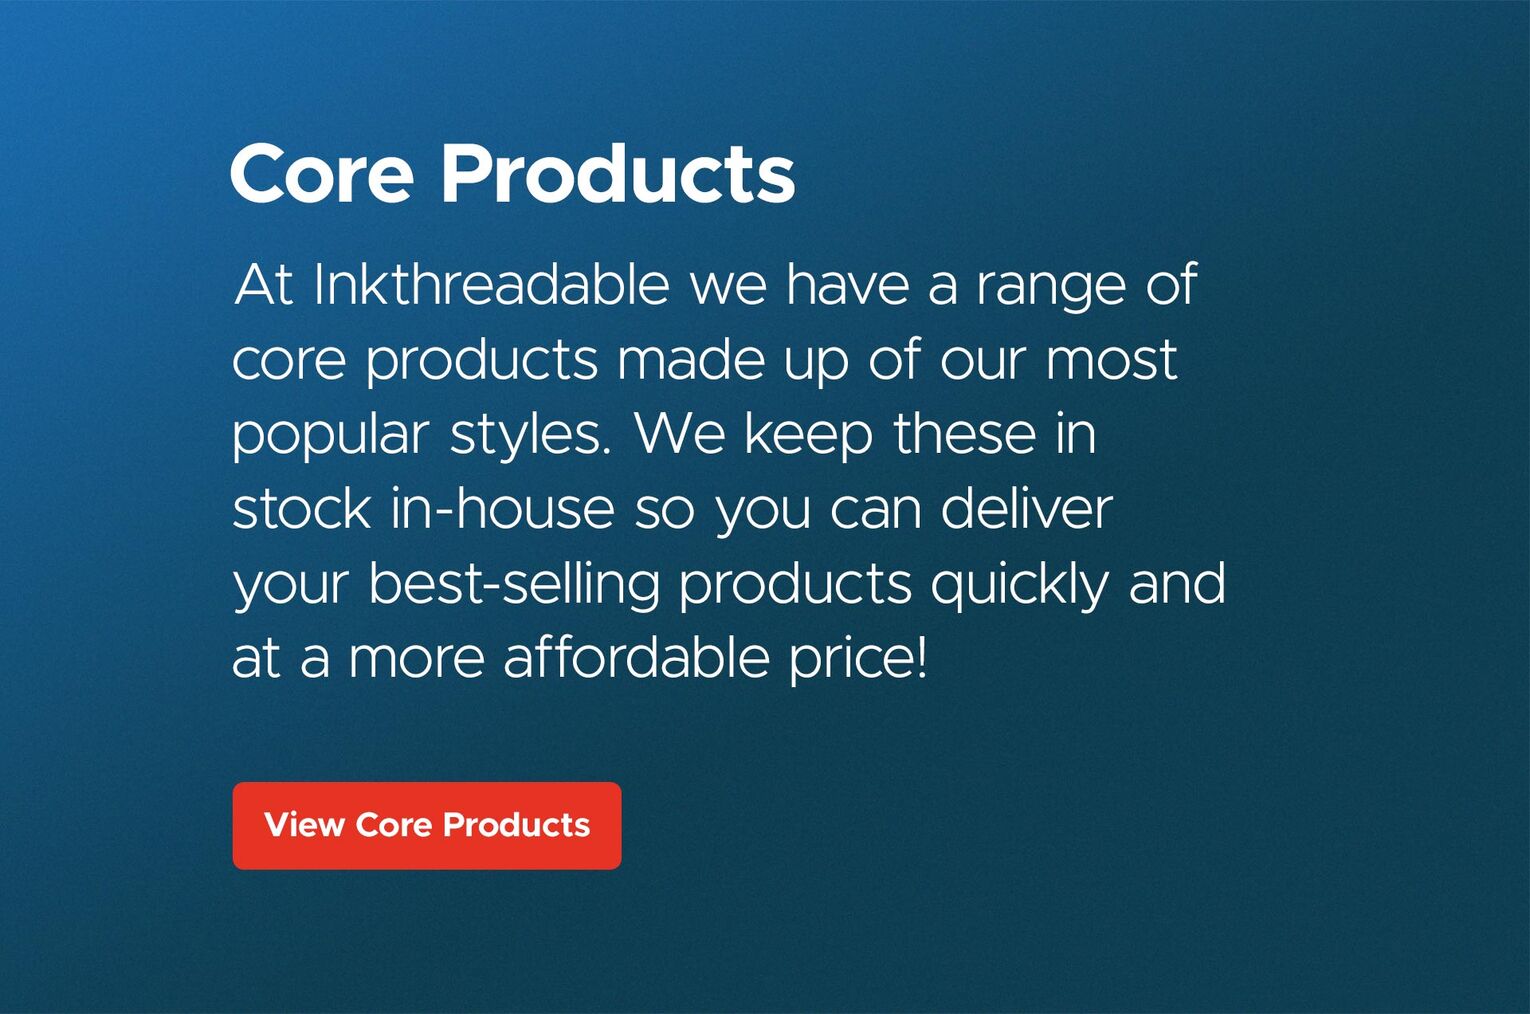 Core products